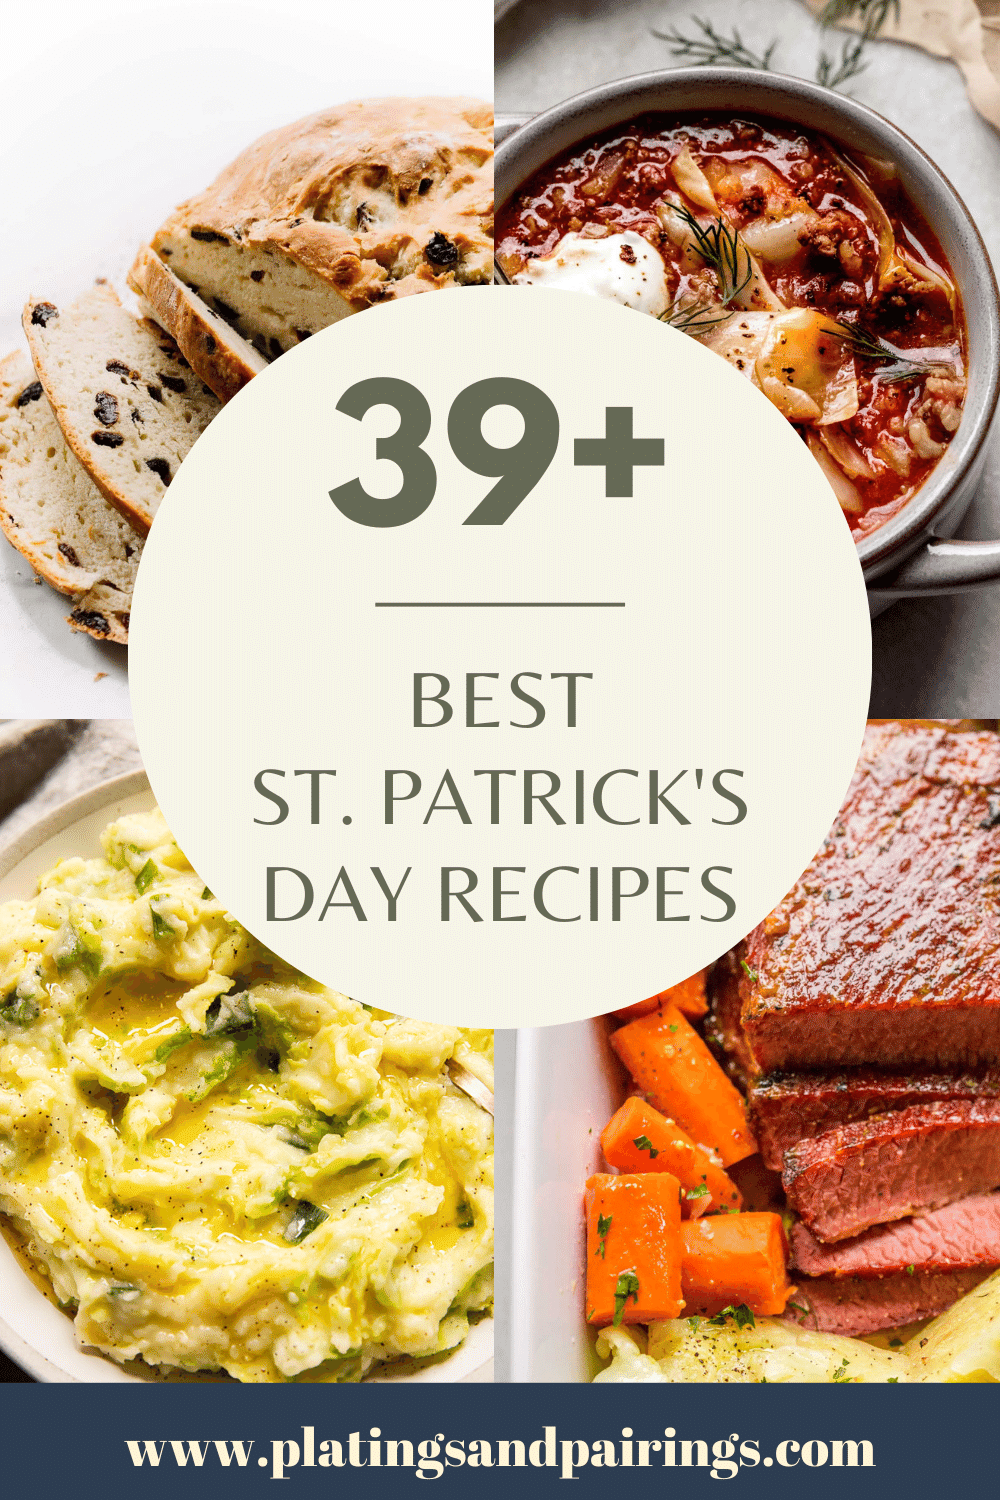 Collage of St. Patrick's Day recipes with text overlay.